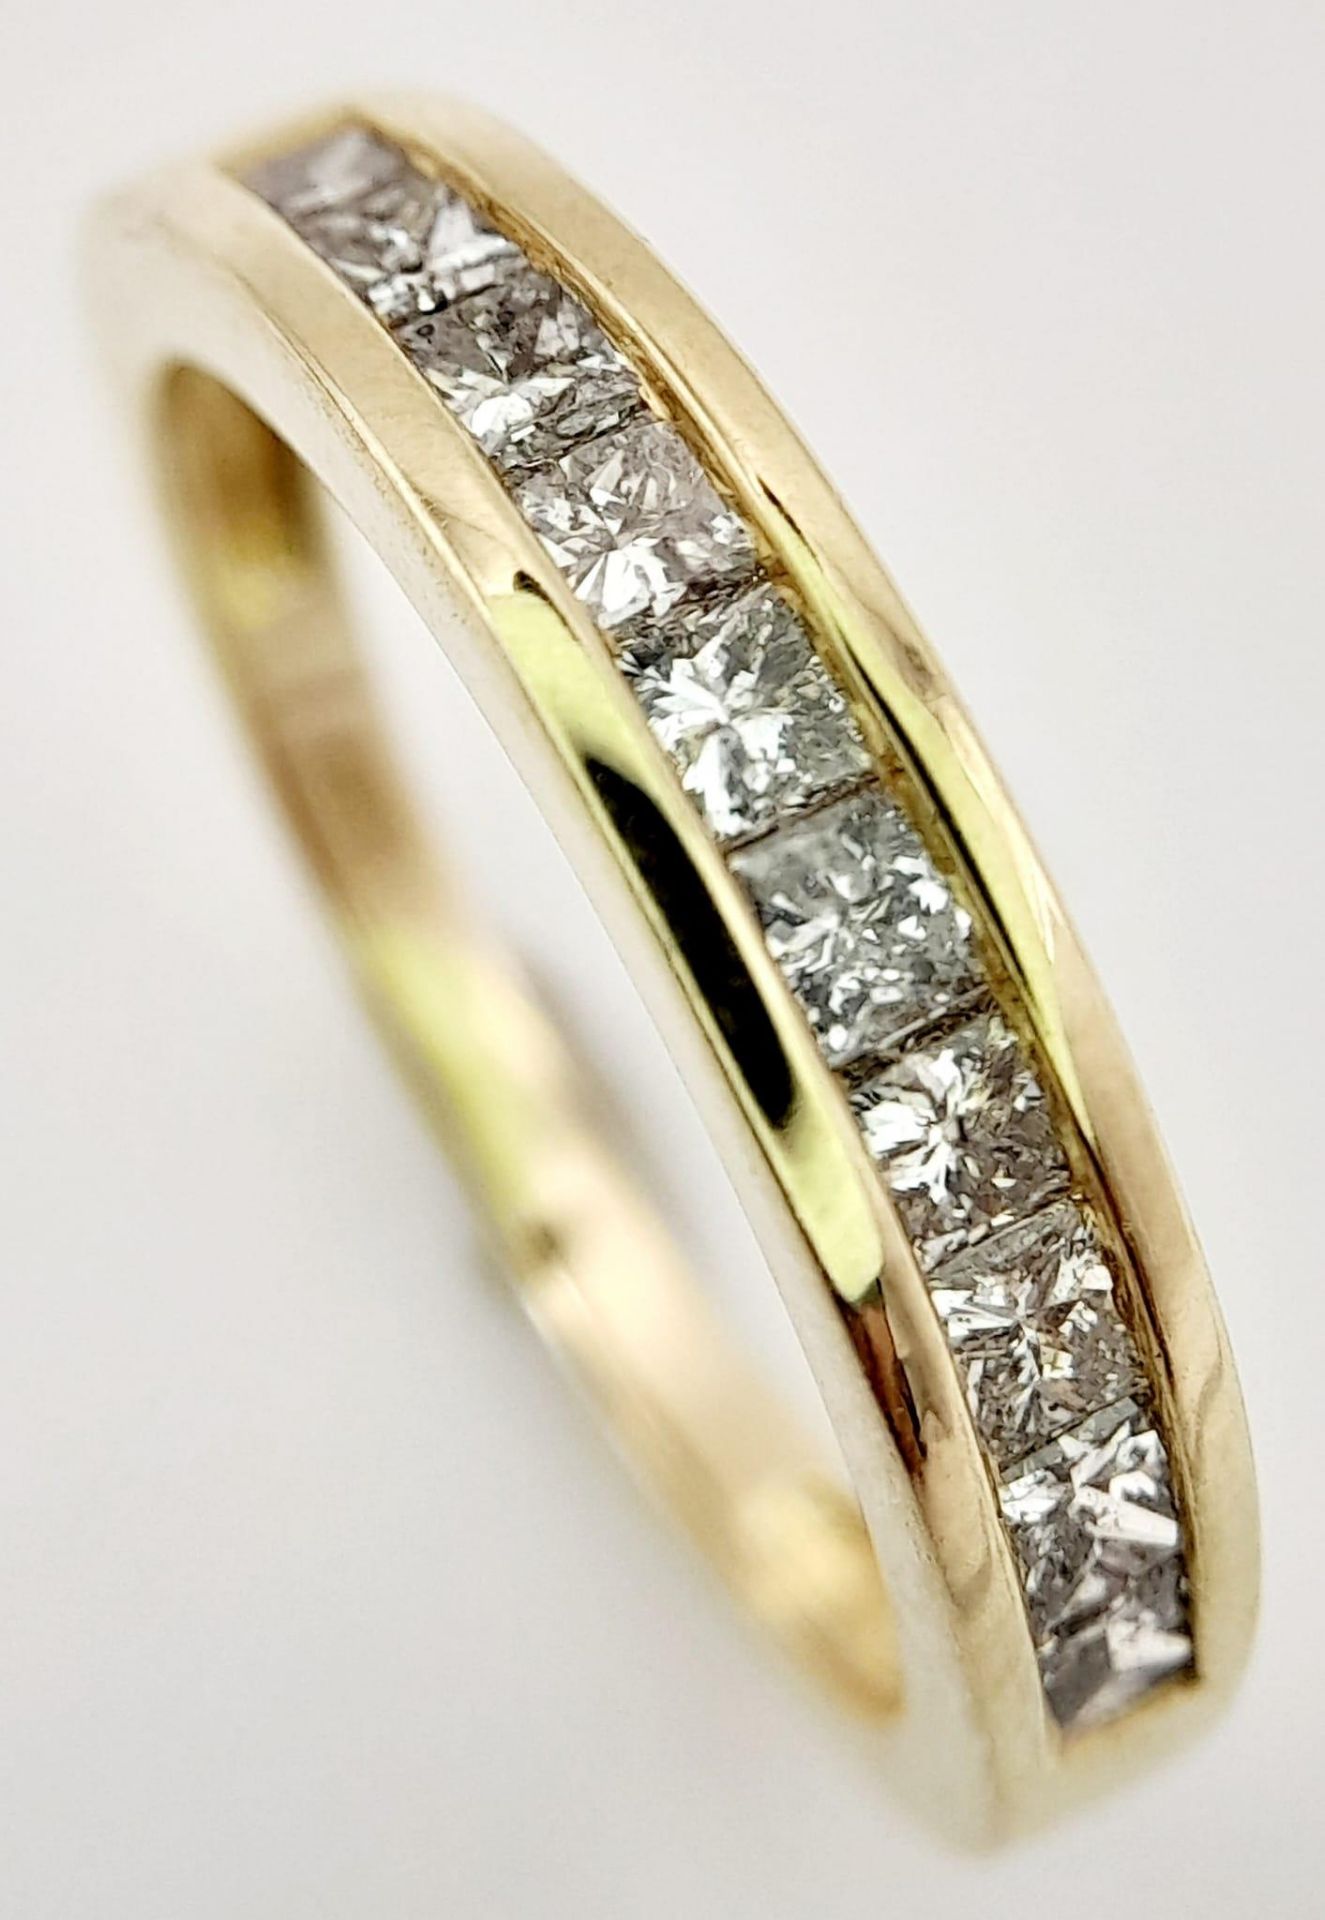 A 9K Yellow Gold Diamond Set Half Eternity Ring. 0.40ctw, Size N, 2.5g total weight. Ref: 8419 - Image 2 of 4